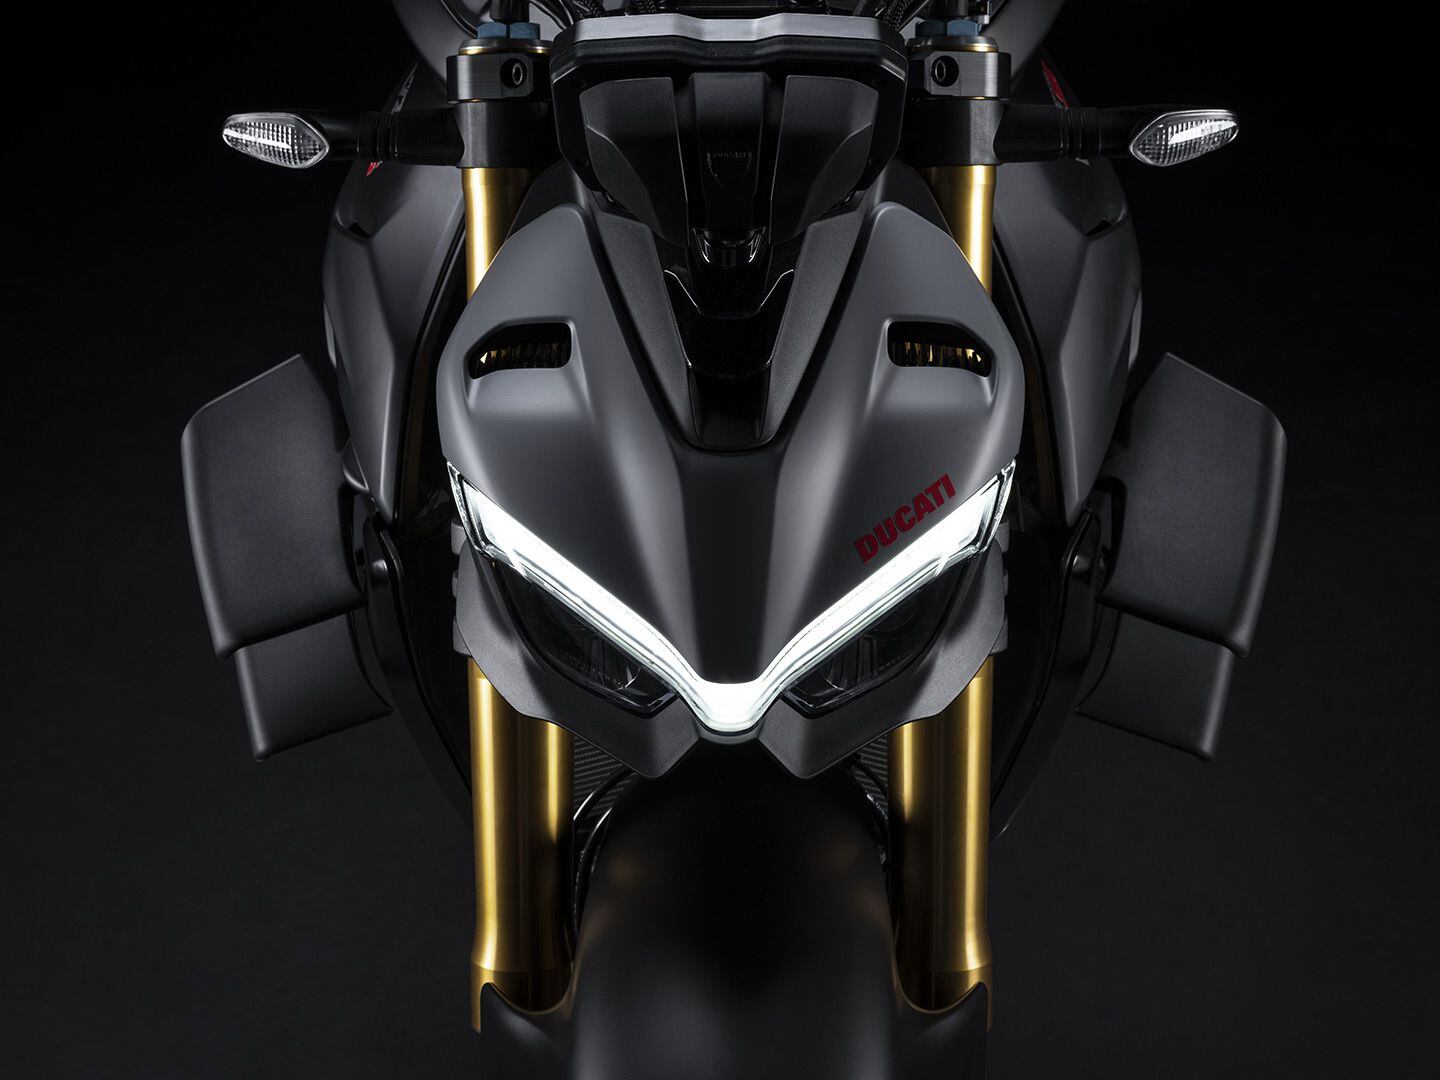 Hard to picture this as the face of a road-legal motorcycle. Menacing!